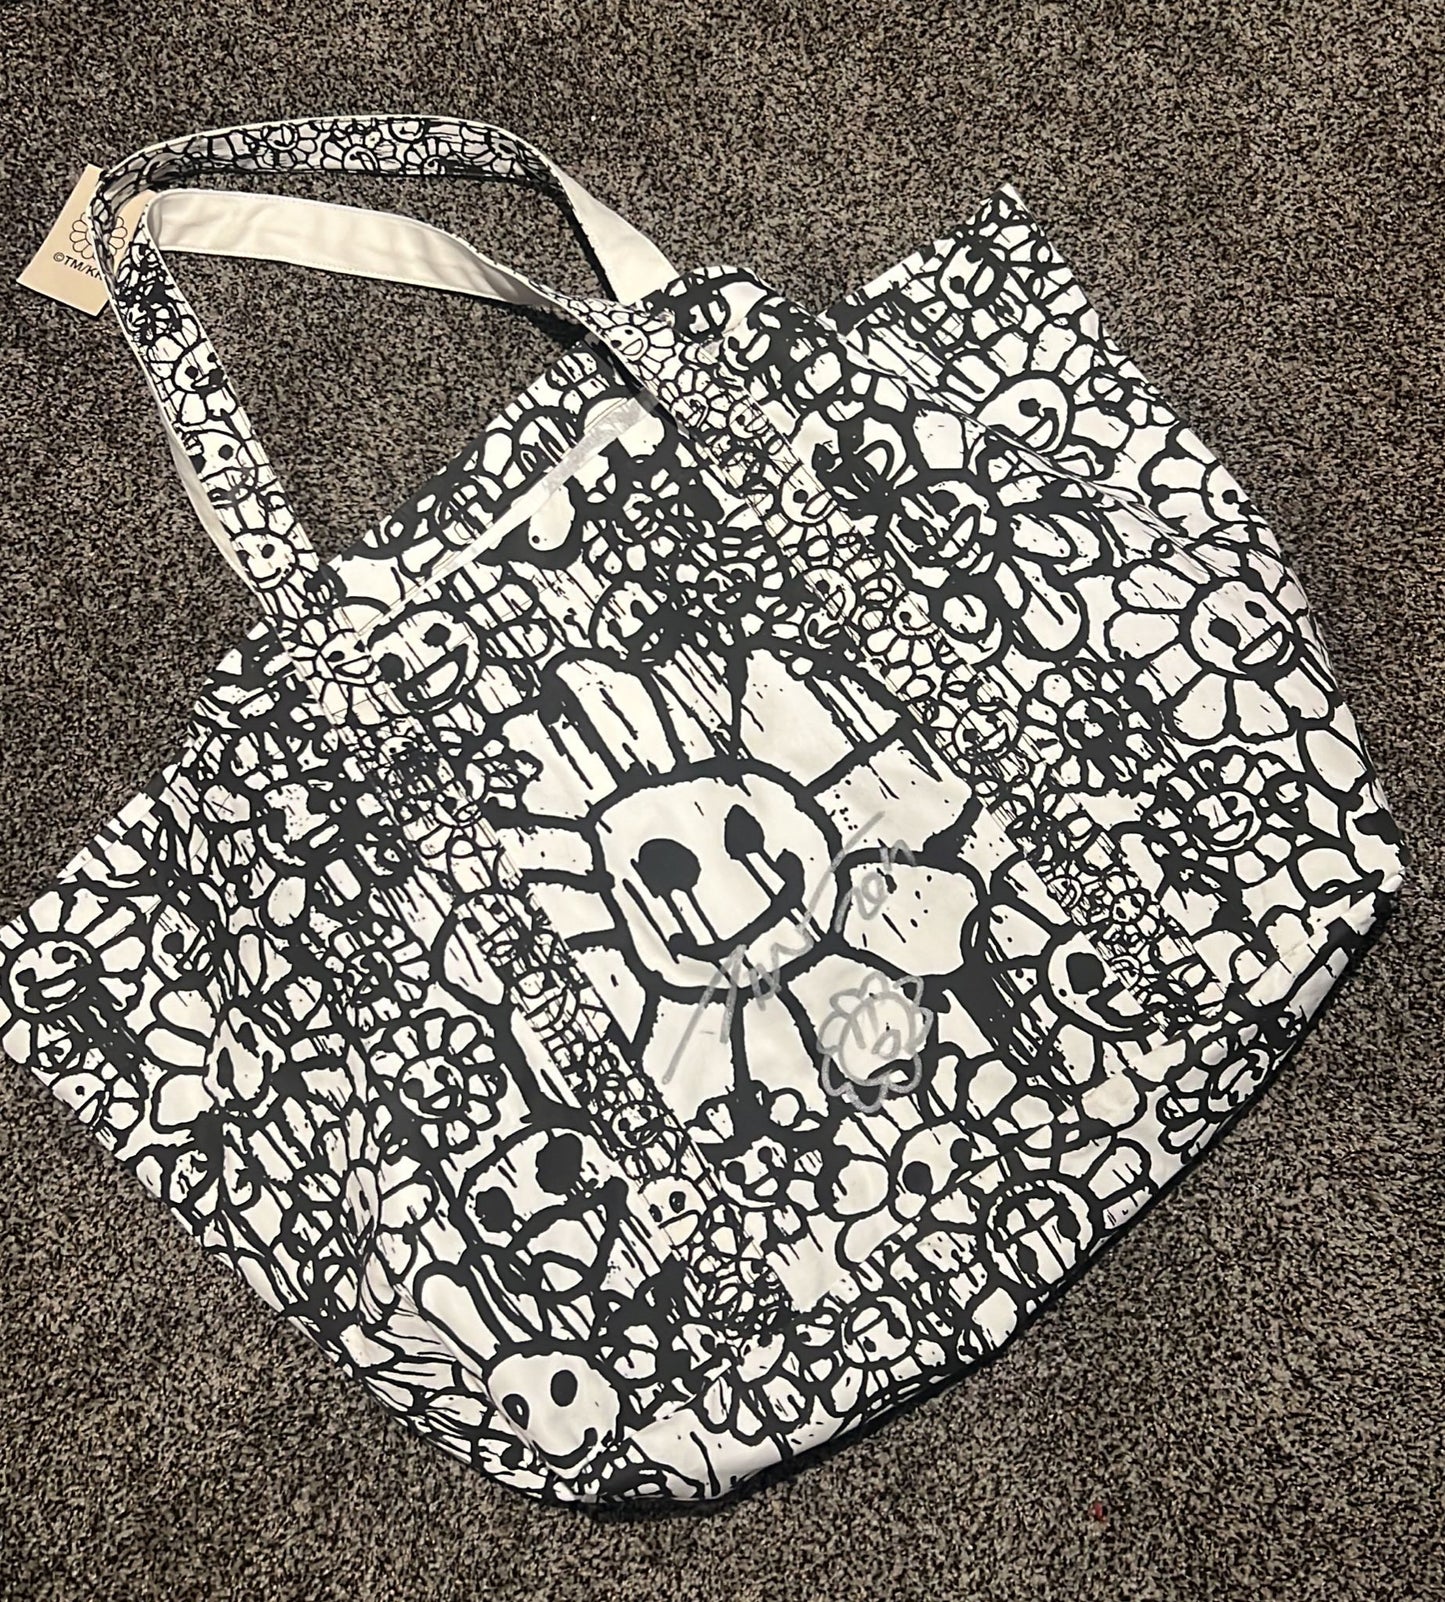 Takashi Murakami x Madsaki all over printed super size canvas bag with –  Lazy Trading Cards